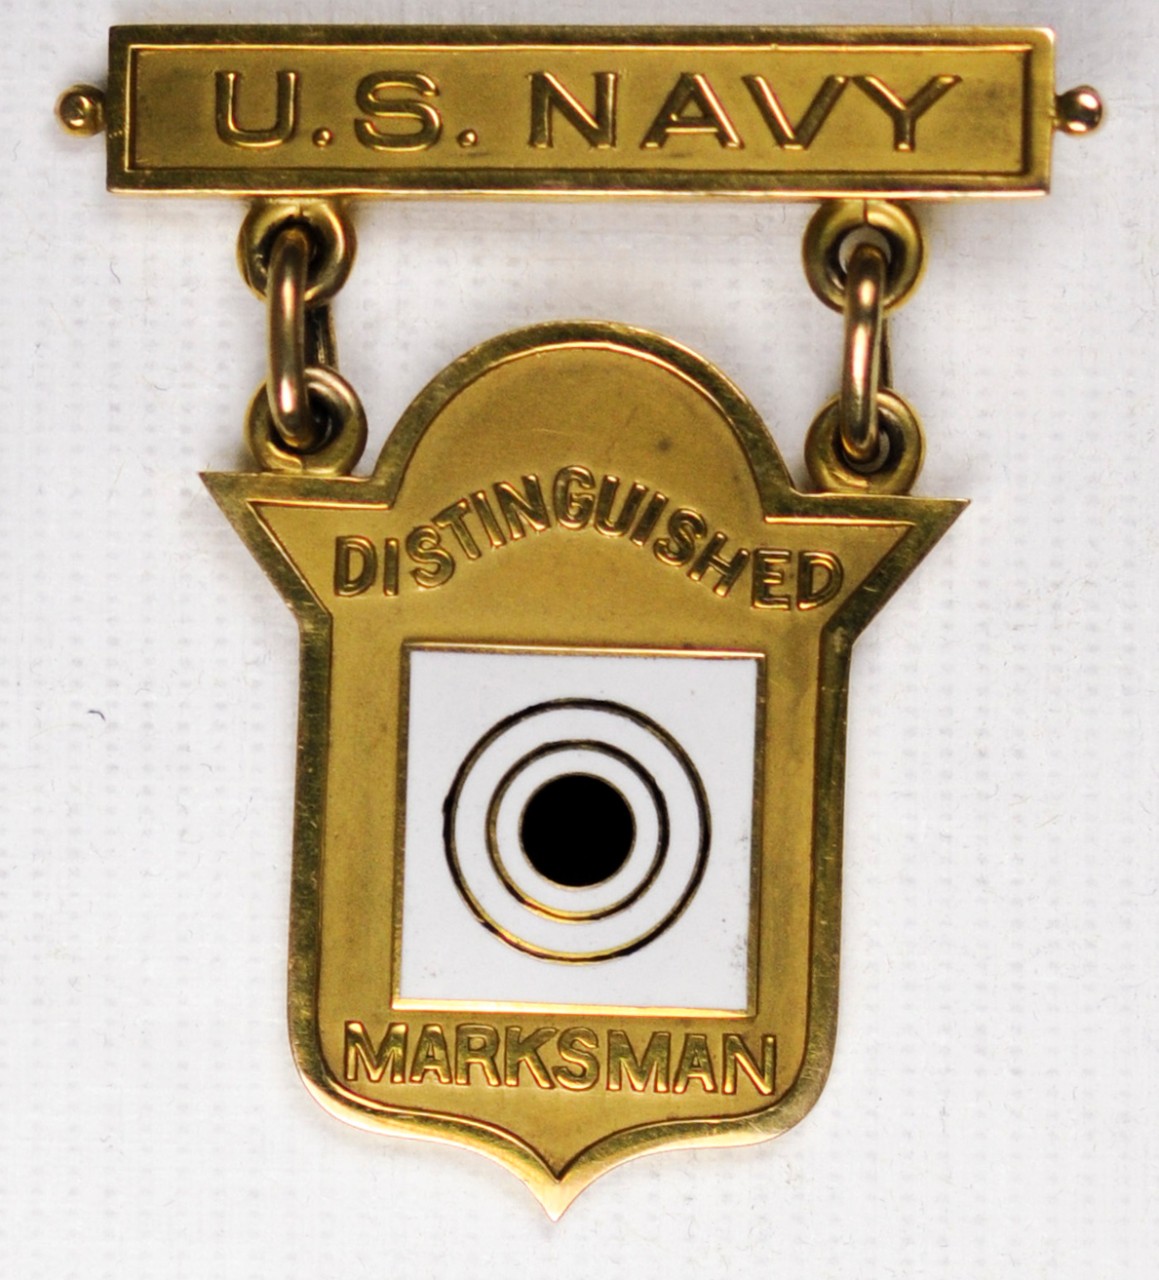 Distinguished Marksman Badge of Carl T OSburn Obverse White and black target in center of gold shield shaped planchette with gold pin and clasp tab